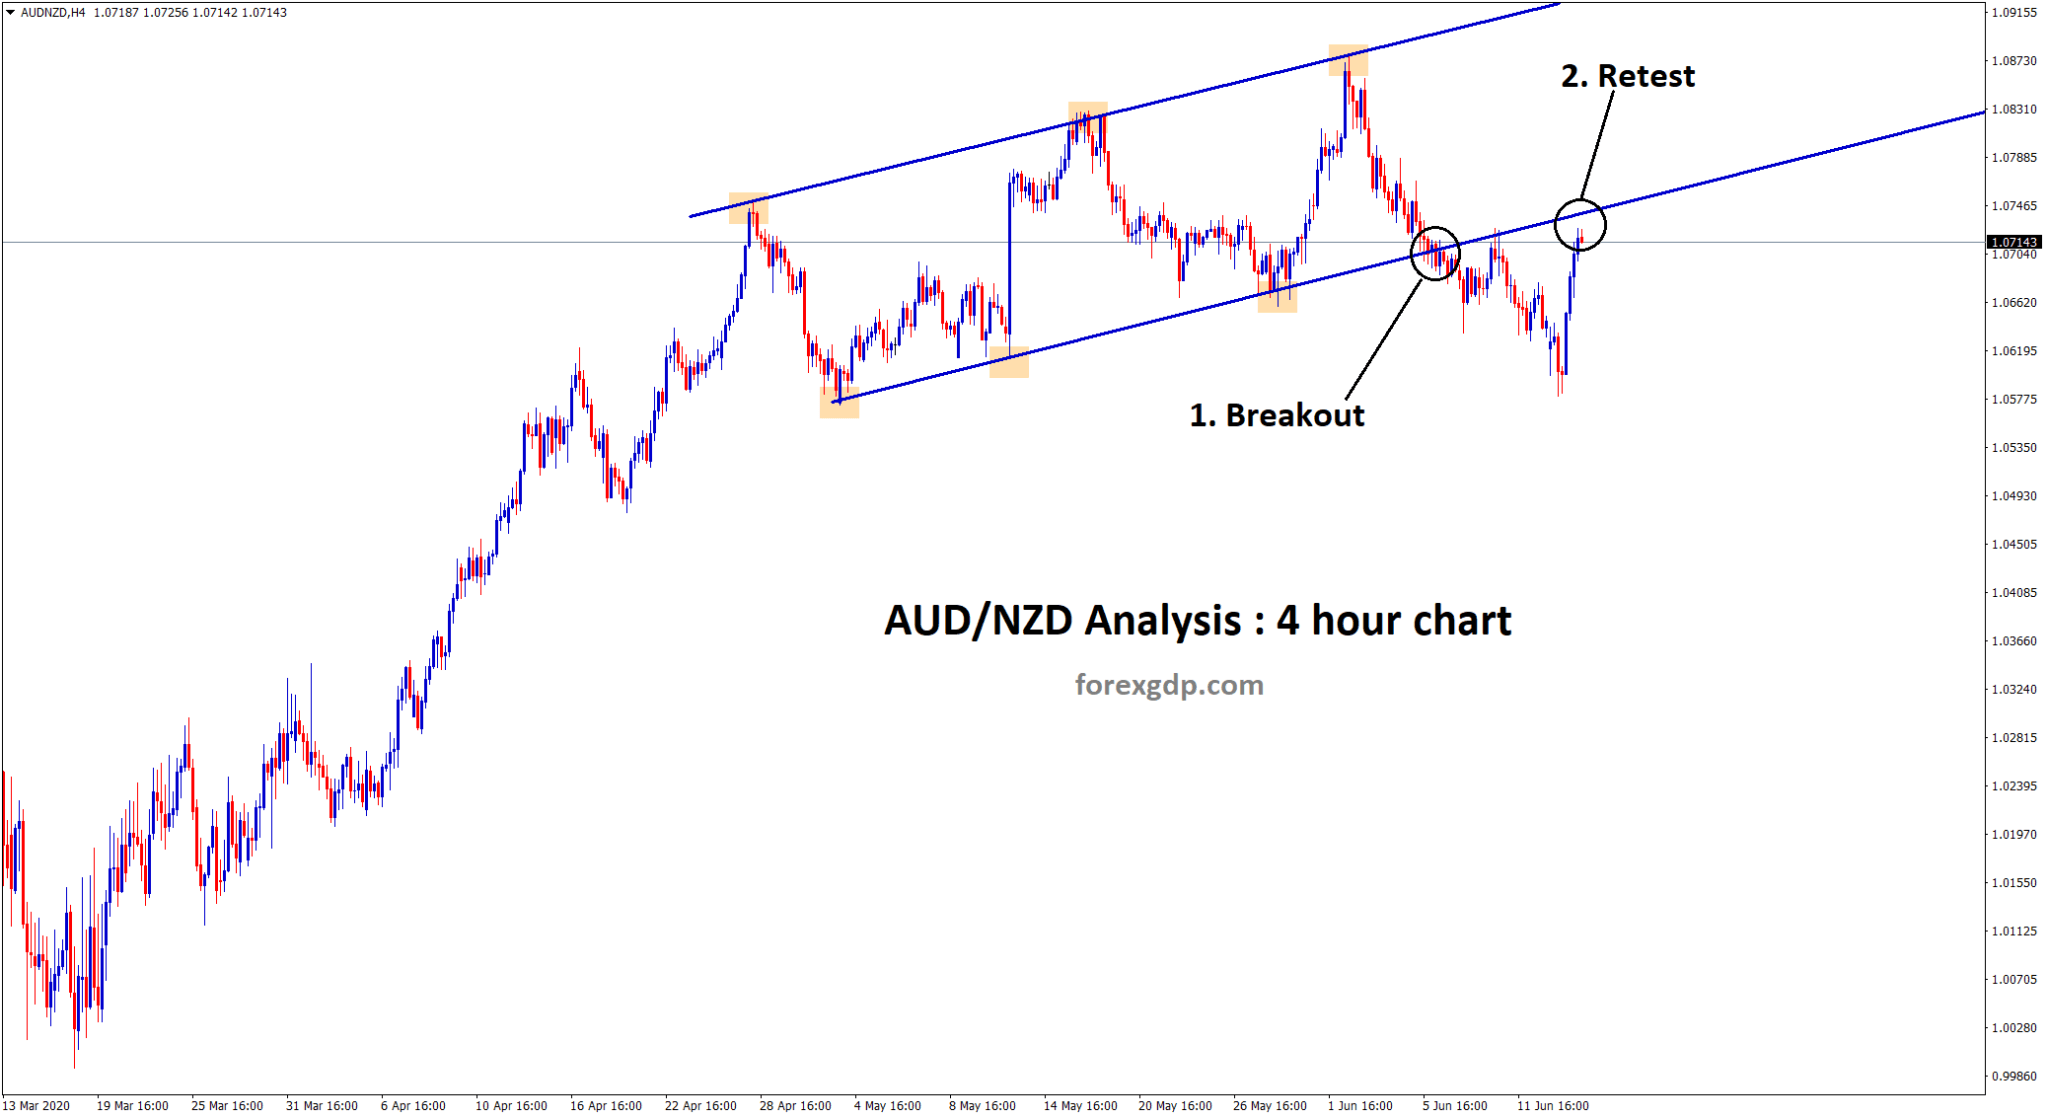 AUDNZD breakout retest gives sell opportunity